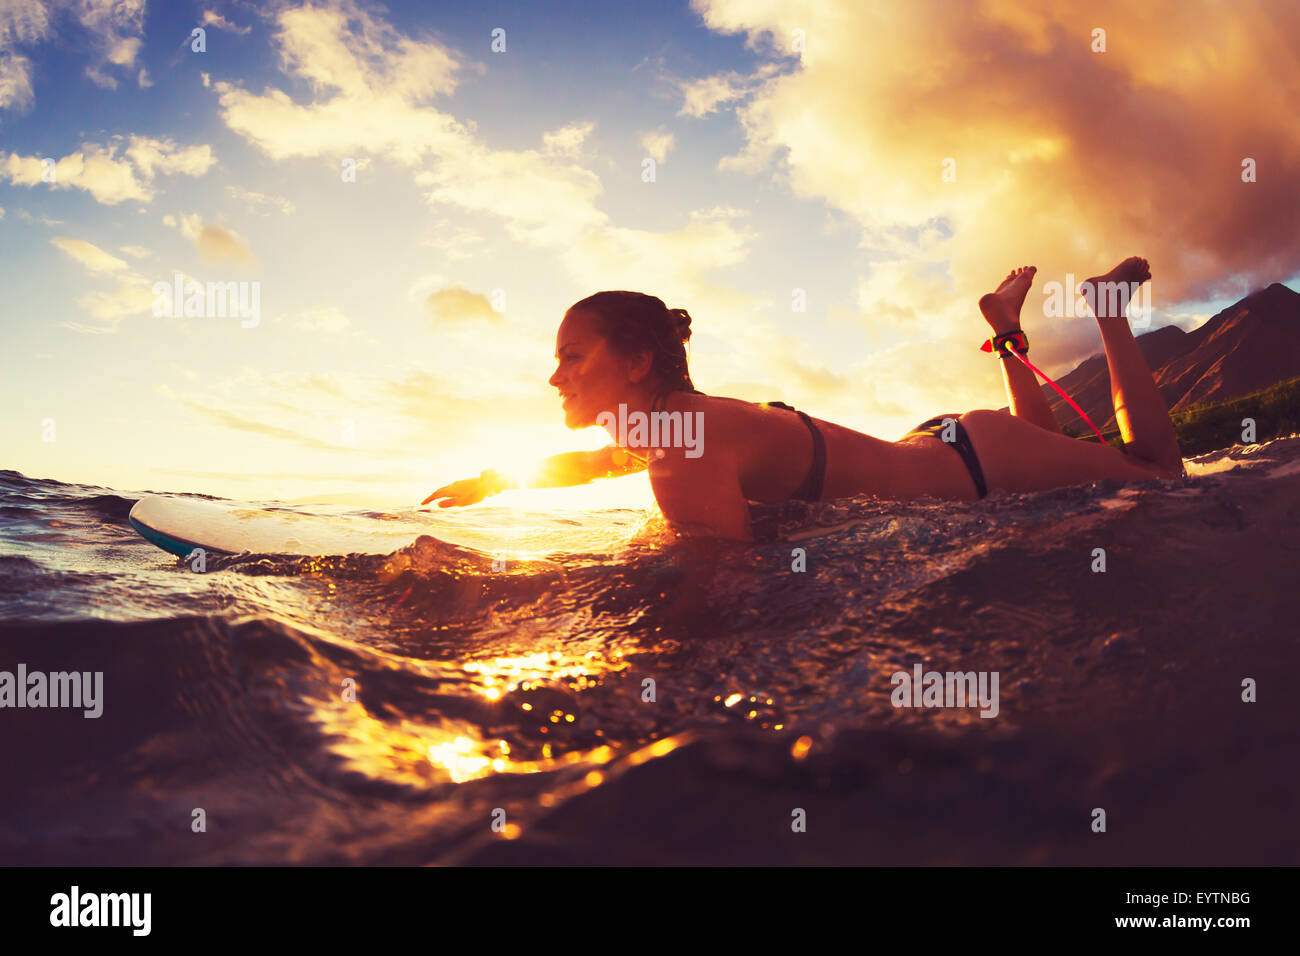 Surfing at Sunset. Outdoor Active Lifestyle. Stock Photo